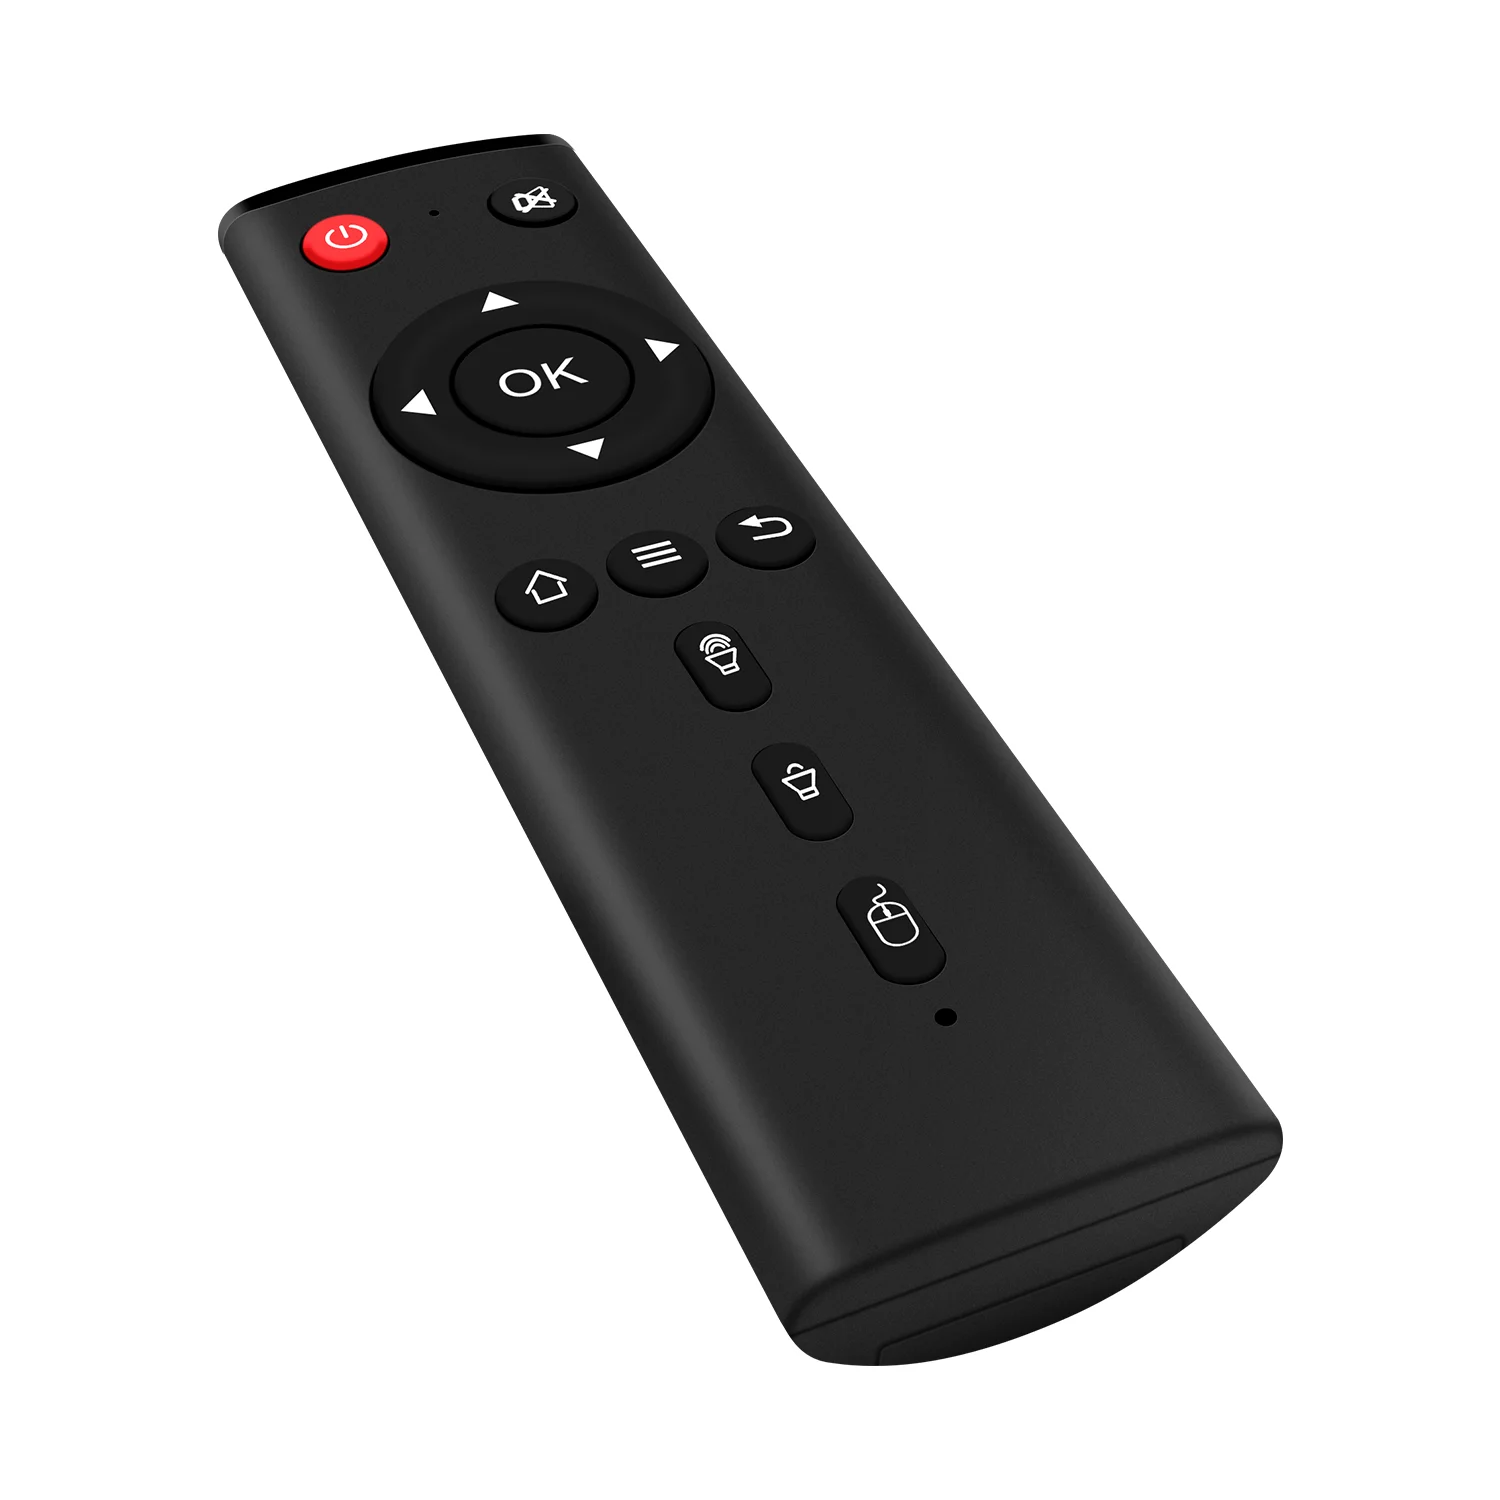 
2.4G Wireless air mouse remote control OTT DVB STB remote controller with higher glossy finish and learning function  (62576757722)